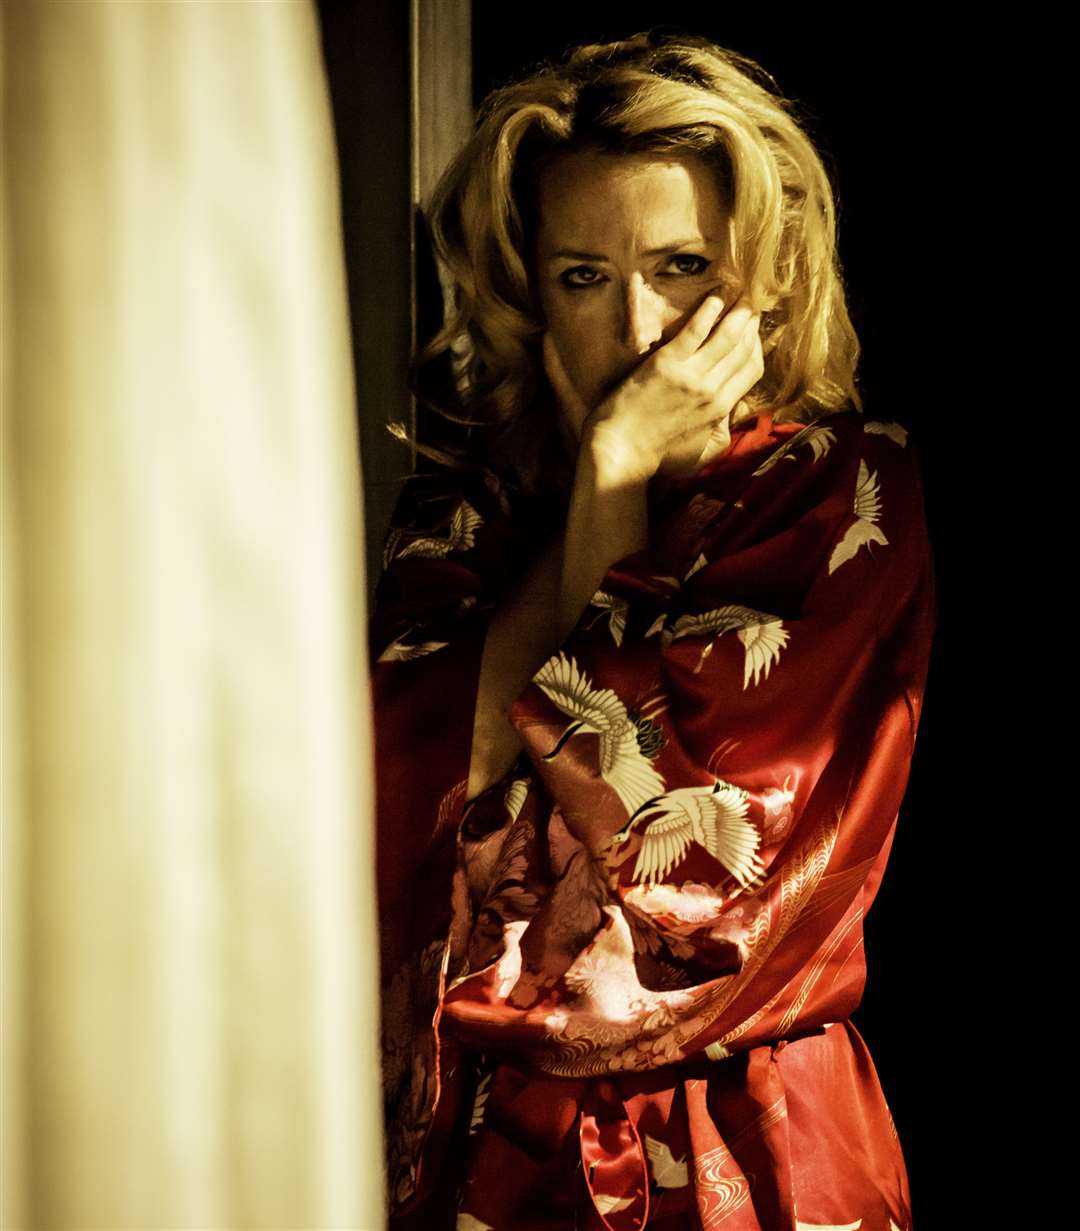 Gillian Anderson stars as Blanche Picture: Johan Persson